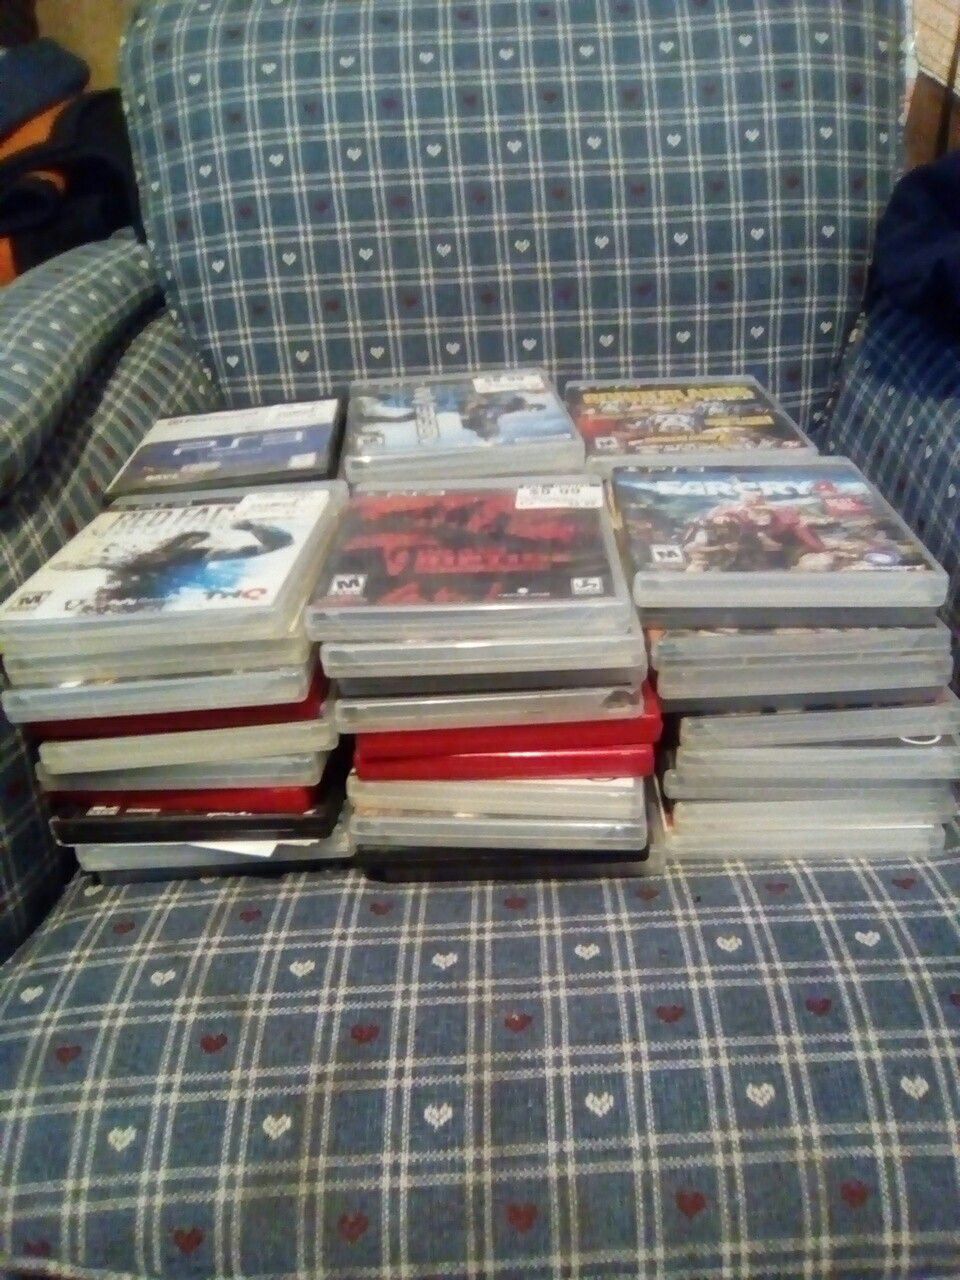 PS3 Games 59 and "32 flat screen tv etc.